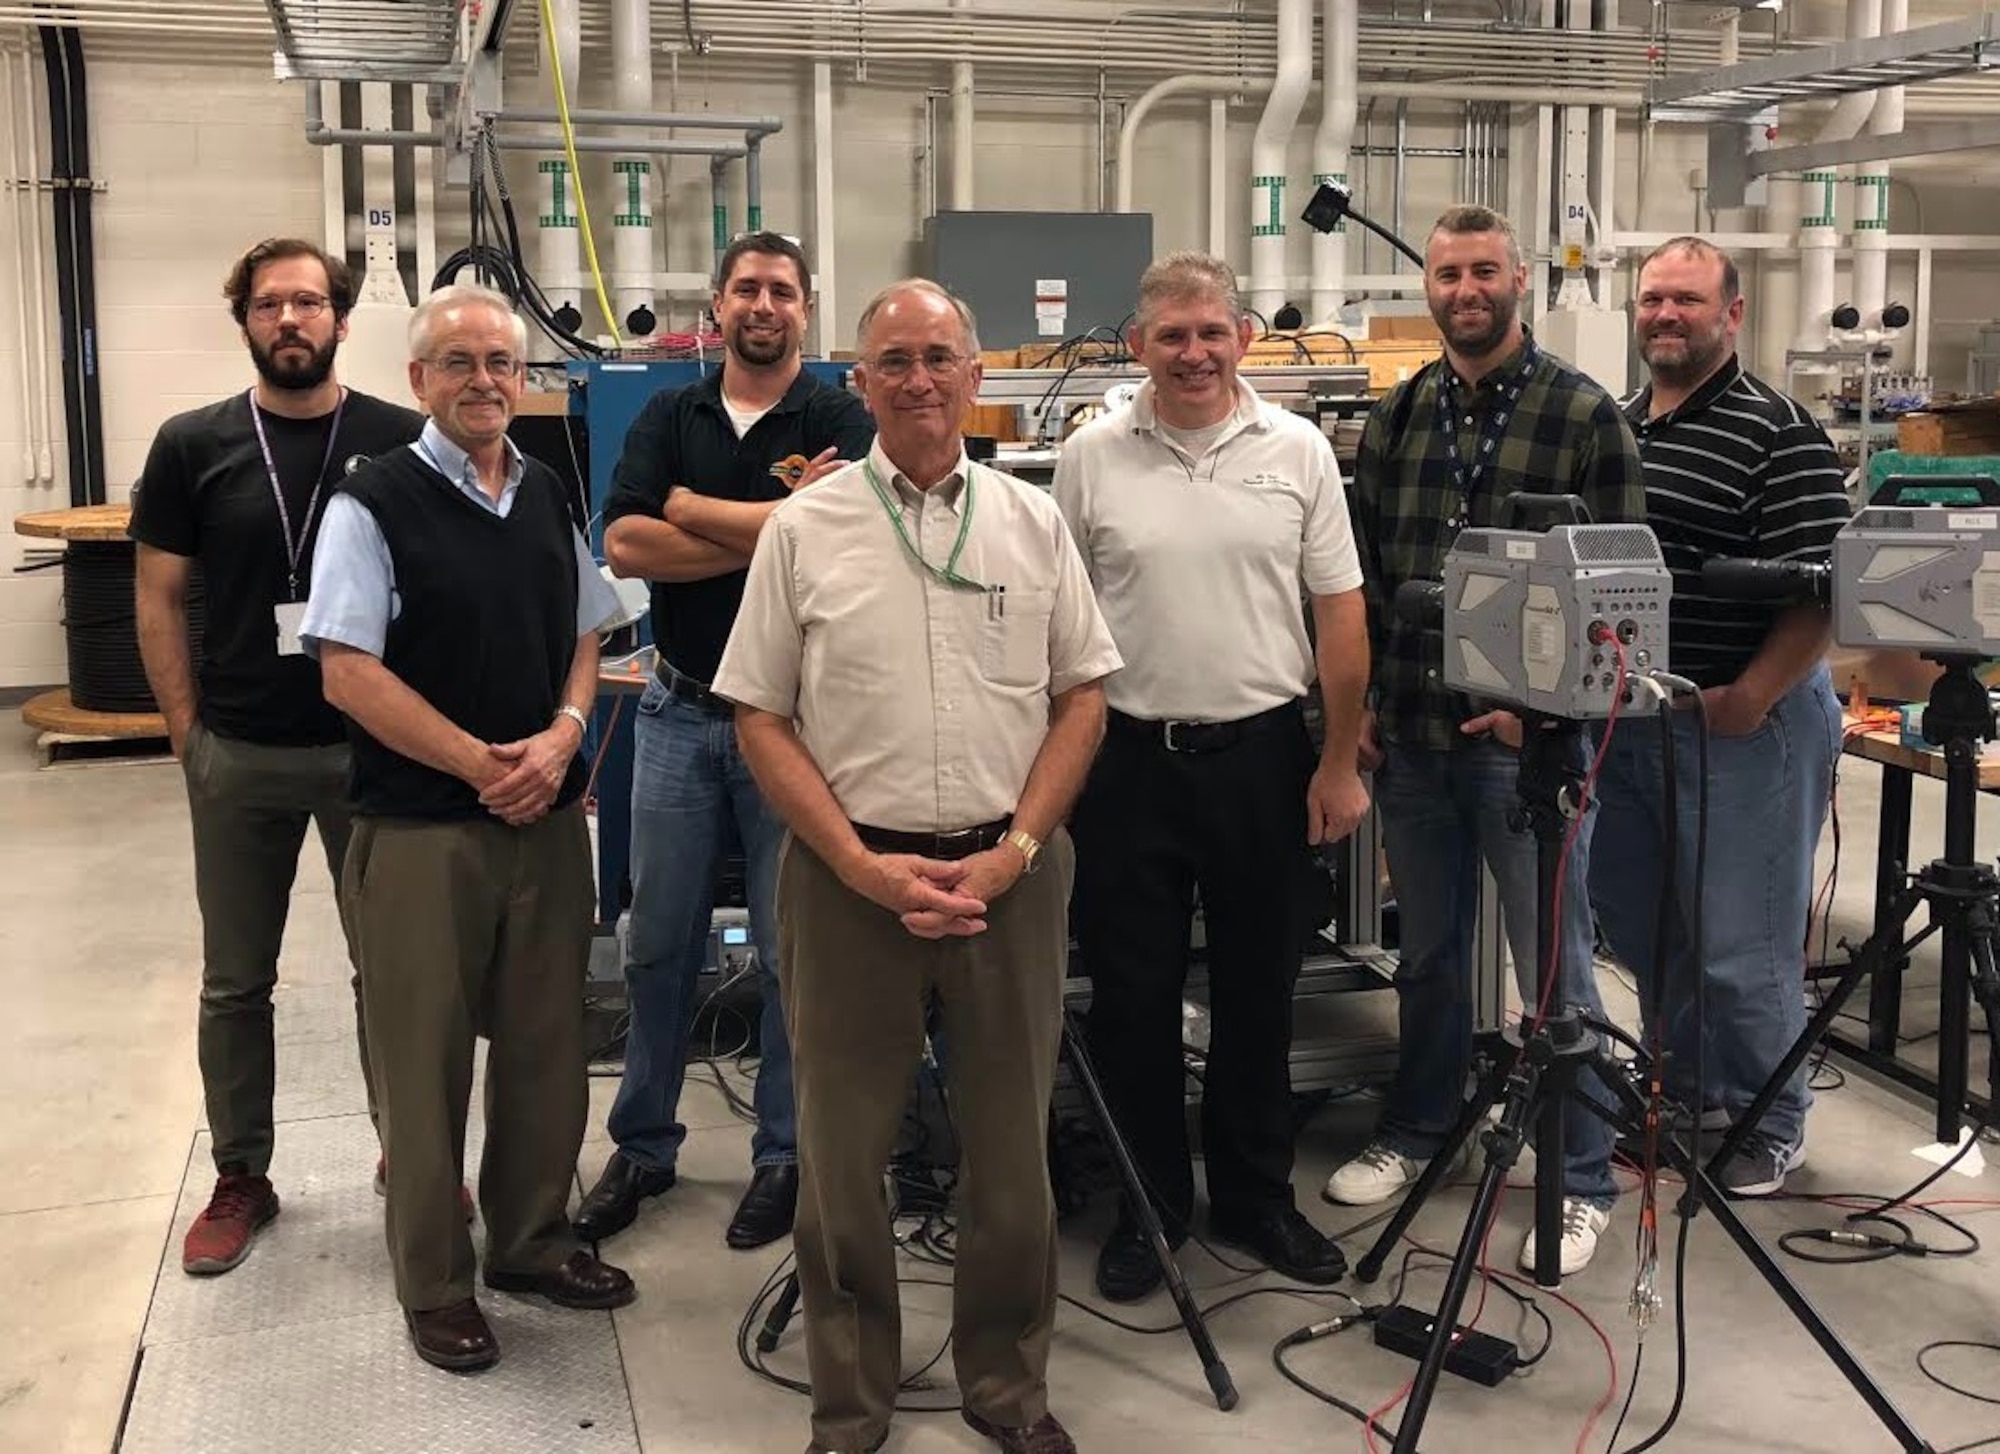 AFRL and NASA researchers teamed to conduct low-pressure arc fault testing in support of a NASA effort to determine the effects of arcing in Earth-orbit conditions. Pictured from left to right:  Erick Rossi De La Fuente, Dan Schweickart, Christopher Kostyk, Dennis Grosjean, Brett Jordan, Corey Boltz, and Dan O’Brien. (U.S. Air Force Photo/Richard Ryman)